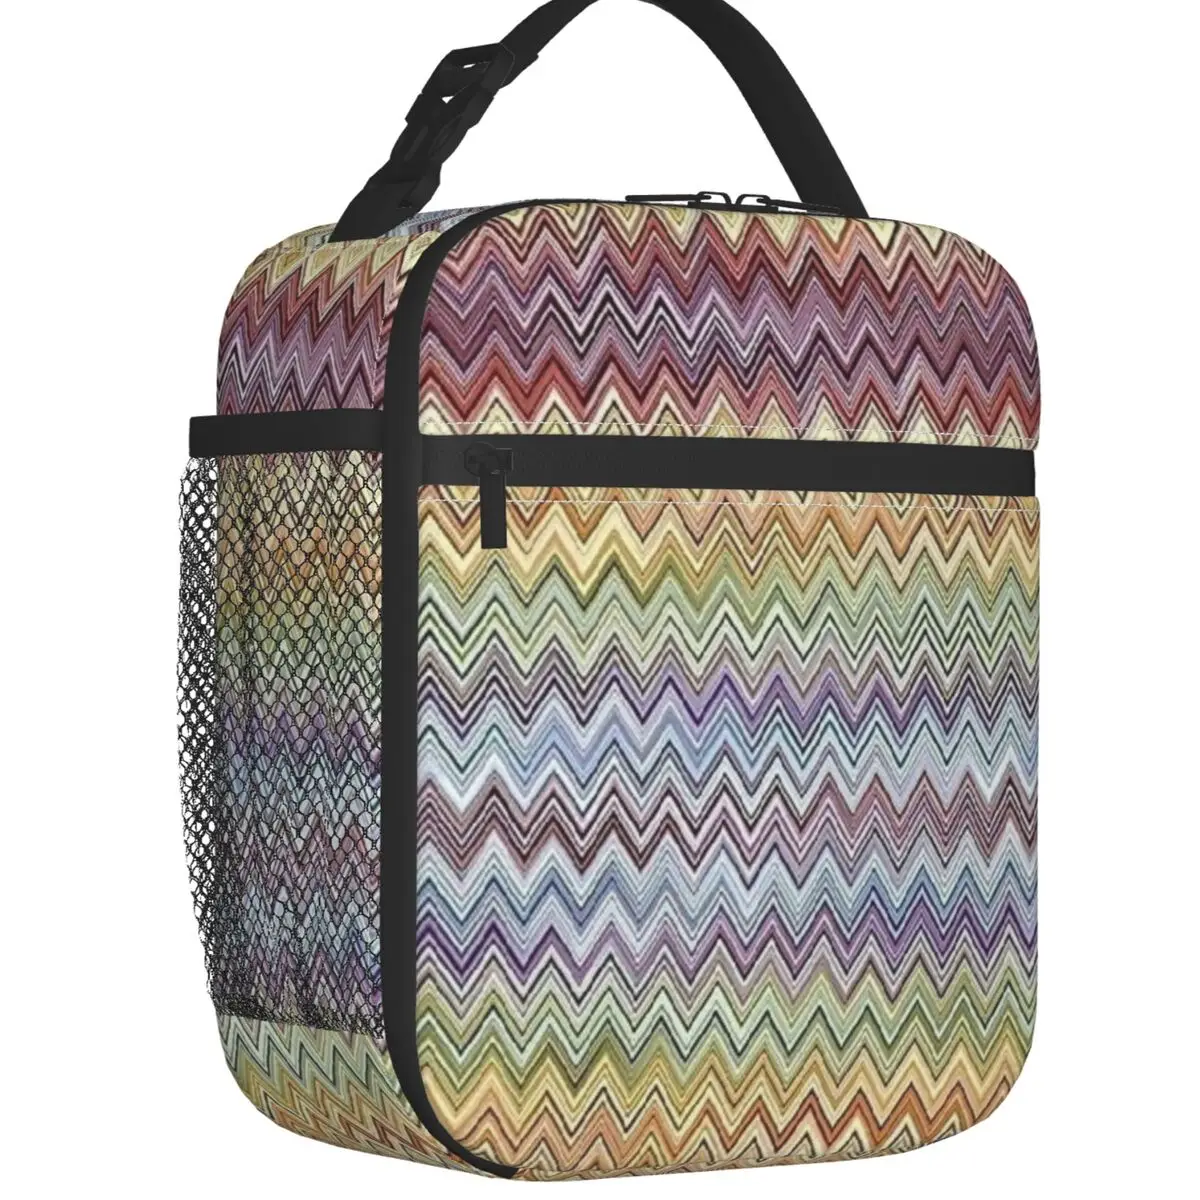 Boho Chic Modern Zigzag Insulated Lunch Bags Women Geometric Multicolor Portable Cooler Thermal Bento Box Outdoor Camping Travel